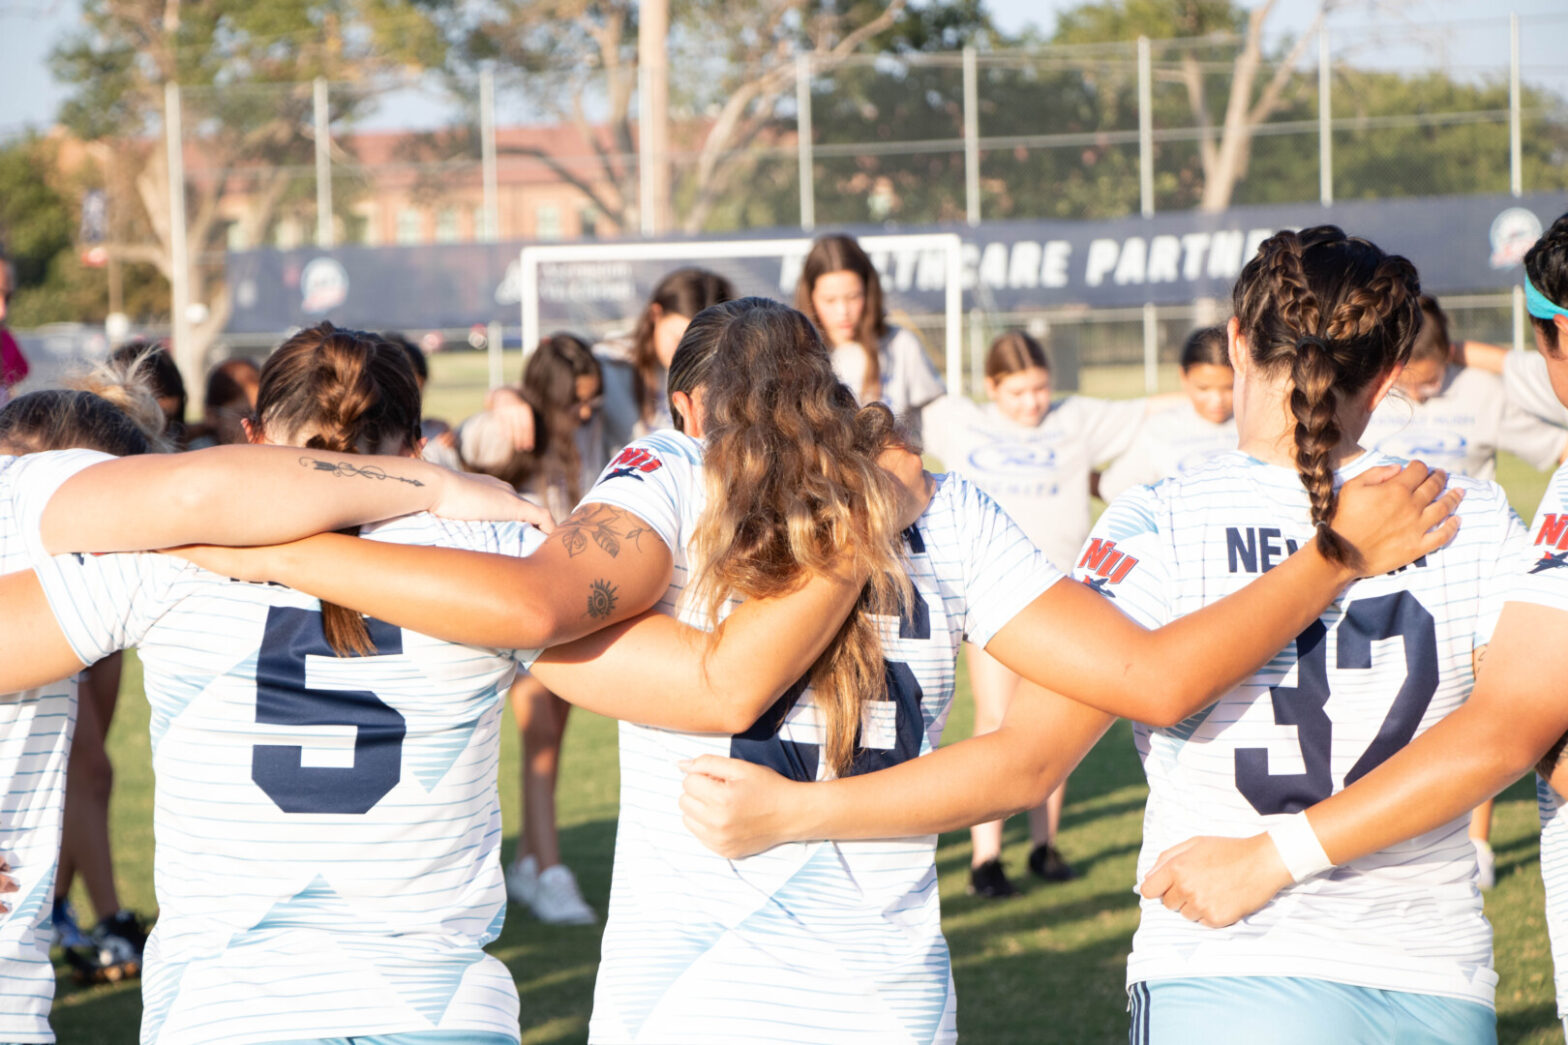 Newman University's women's soccer team embraces on the field.